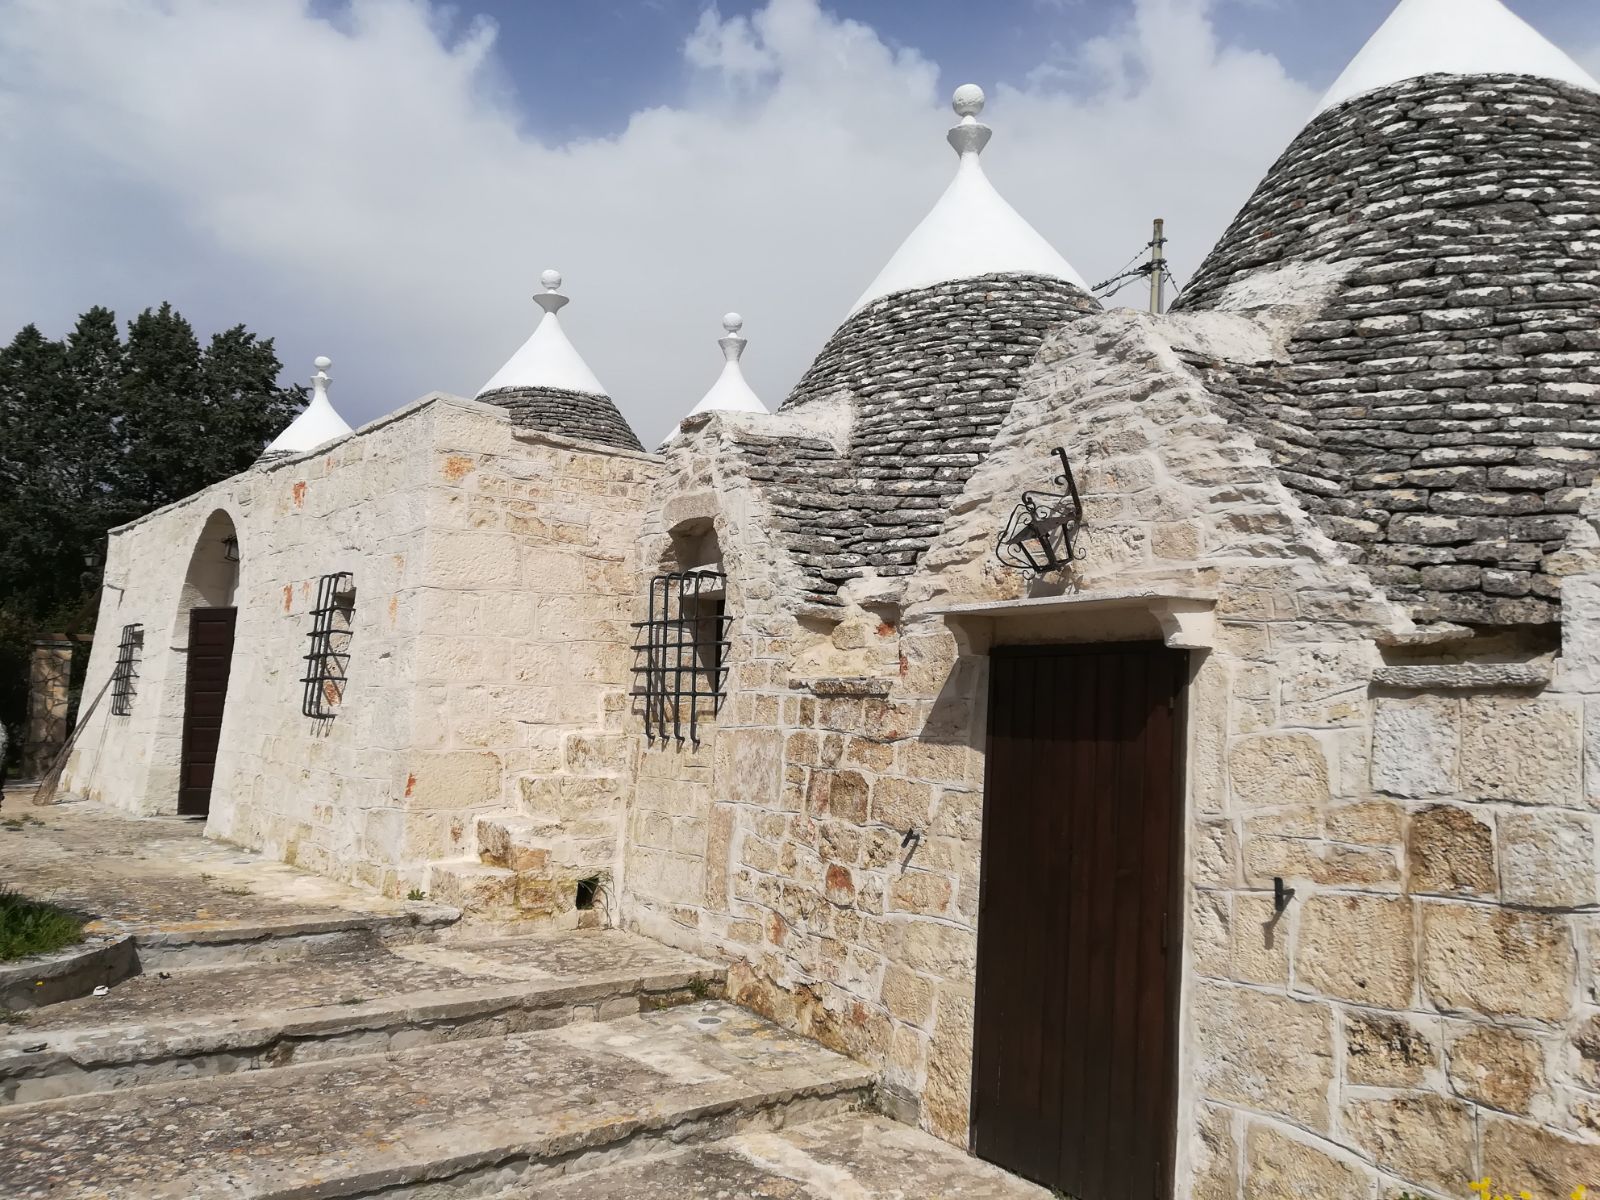 0 KM RECOVERY: THE CONSERVATIVE RESTORATION OF TRULLI